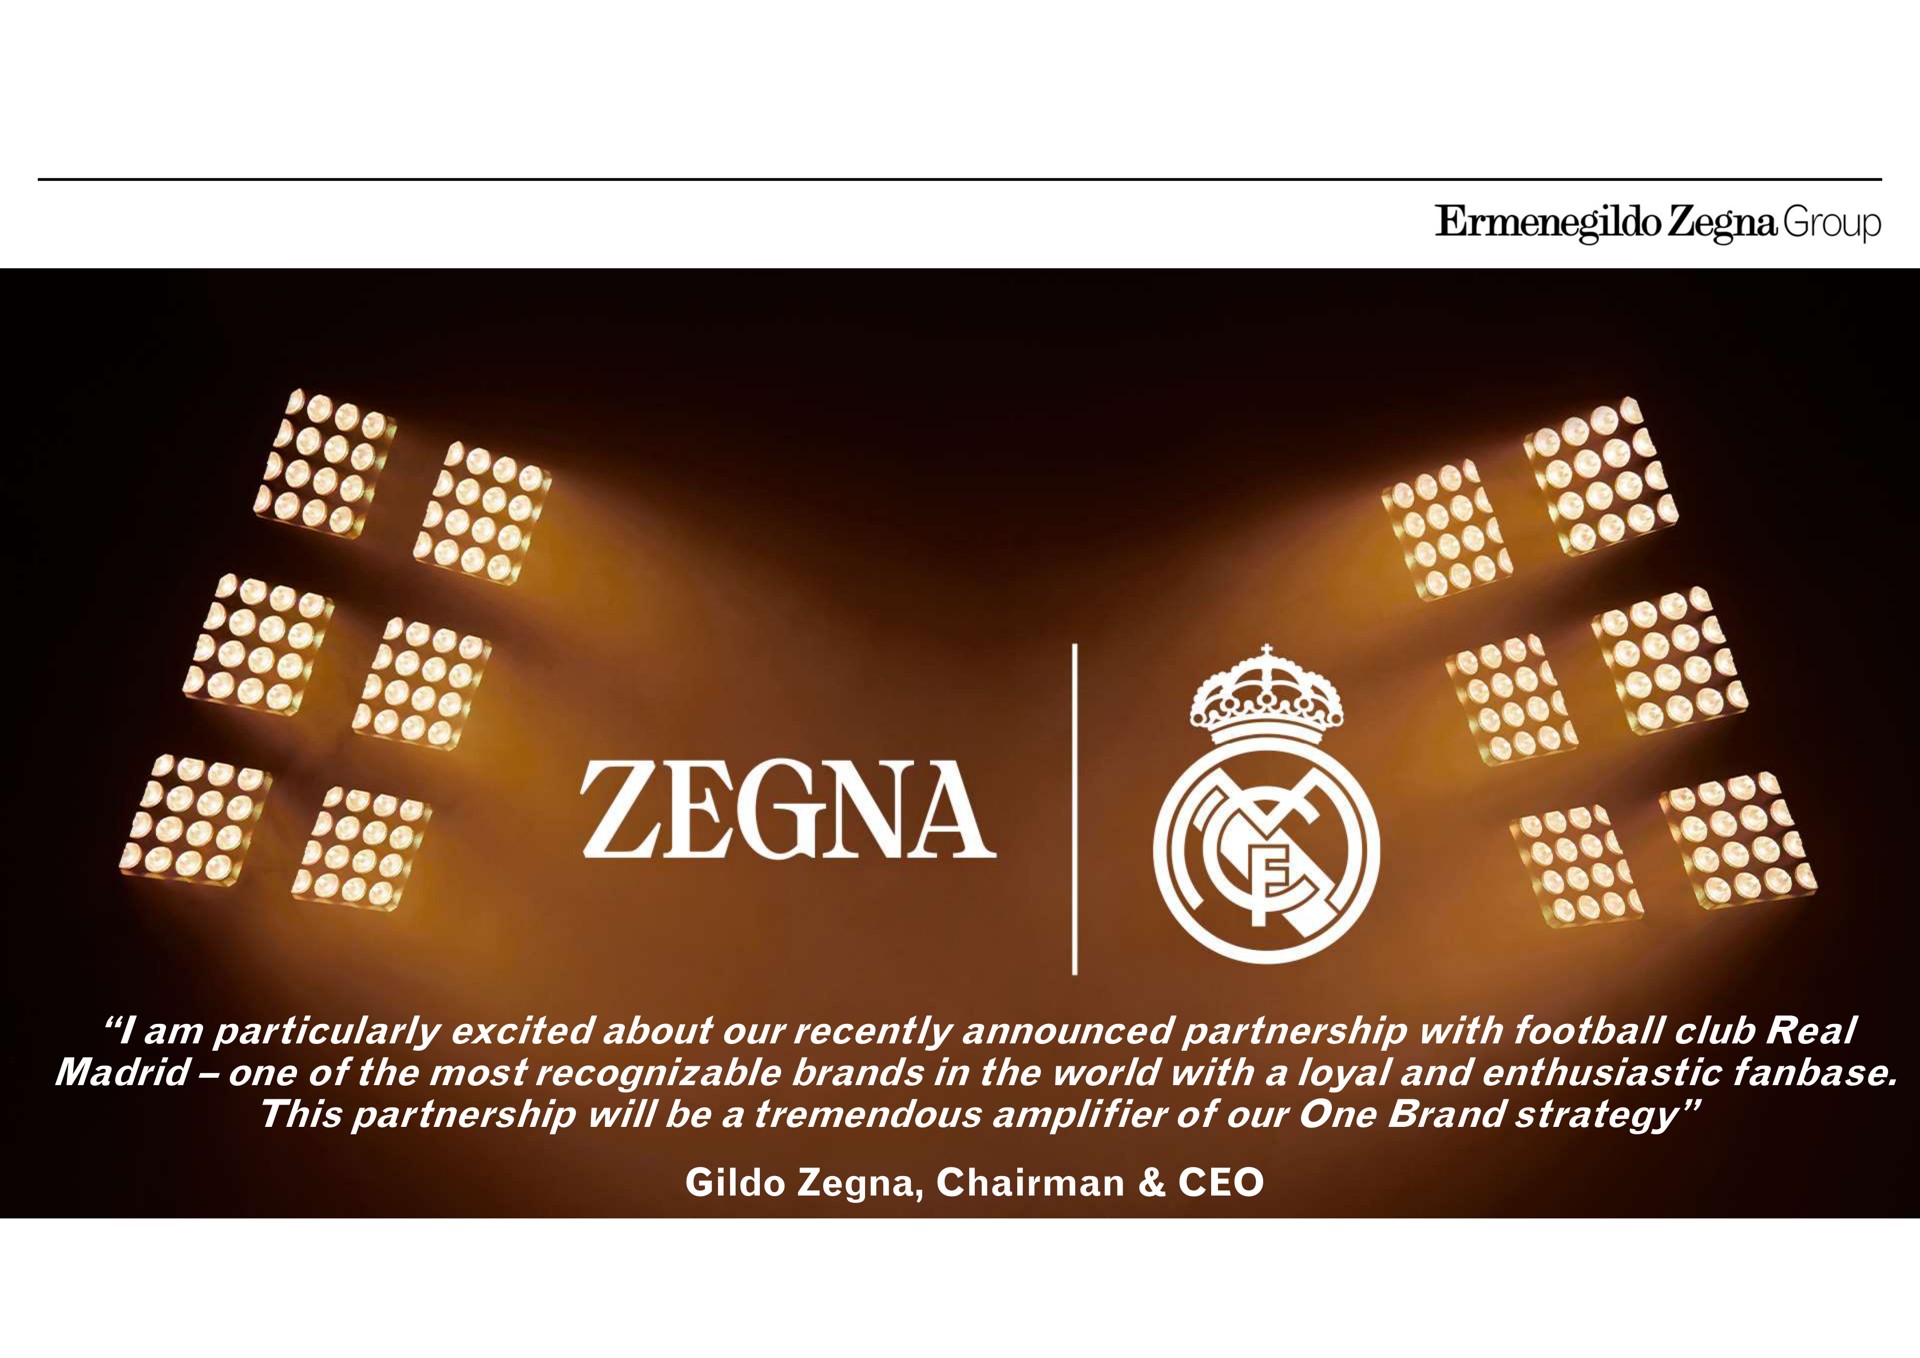 i am particularly excited about our recently announced partnership with football club real one of the most recognizable brands in the world with a loyal and enthusiastic this partnership will be a tremendous amplifier of our one brand strategy chairman yet way cit me group won ses lam | Zegna